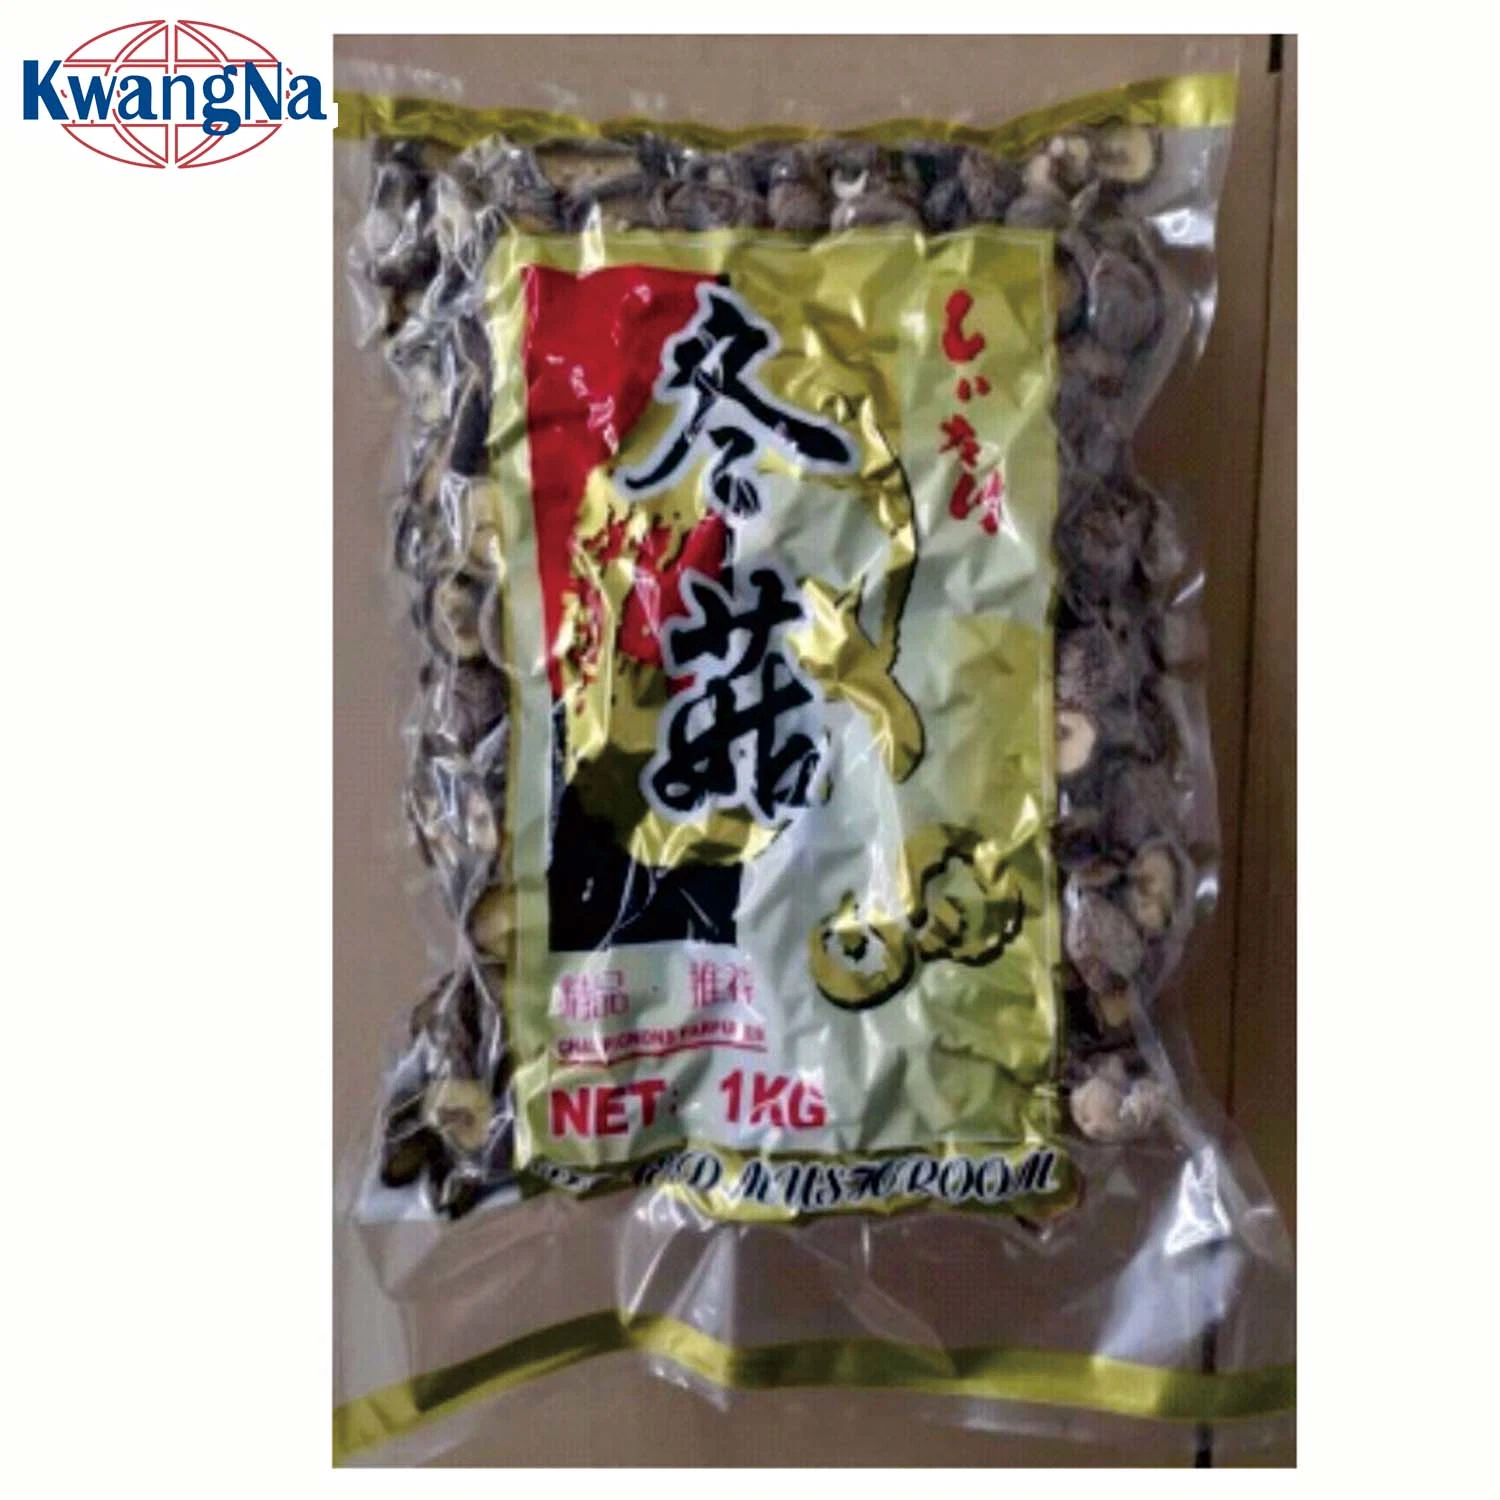 Mushroom Manufacturing Business Plant Dried Shiitake Mushroom with 1 Kg for Resale